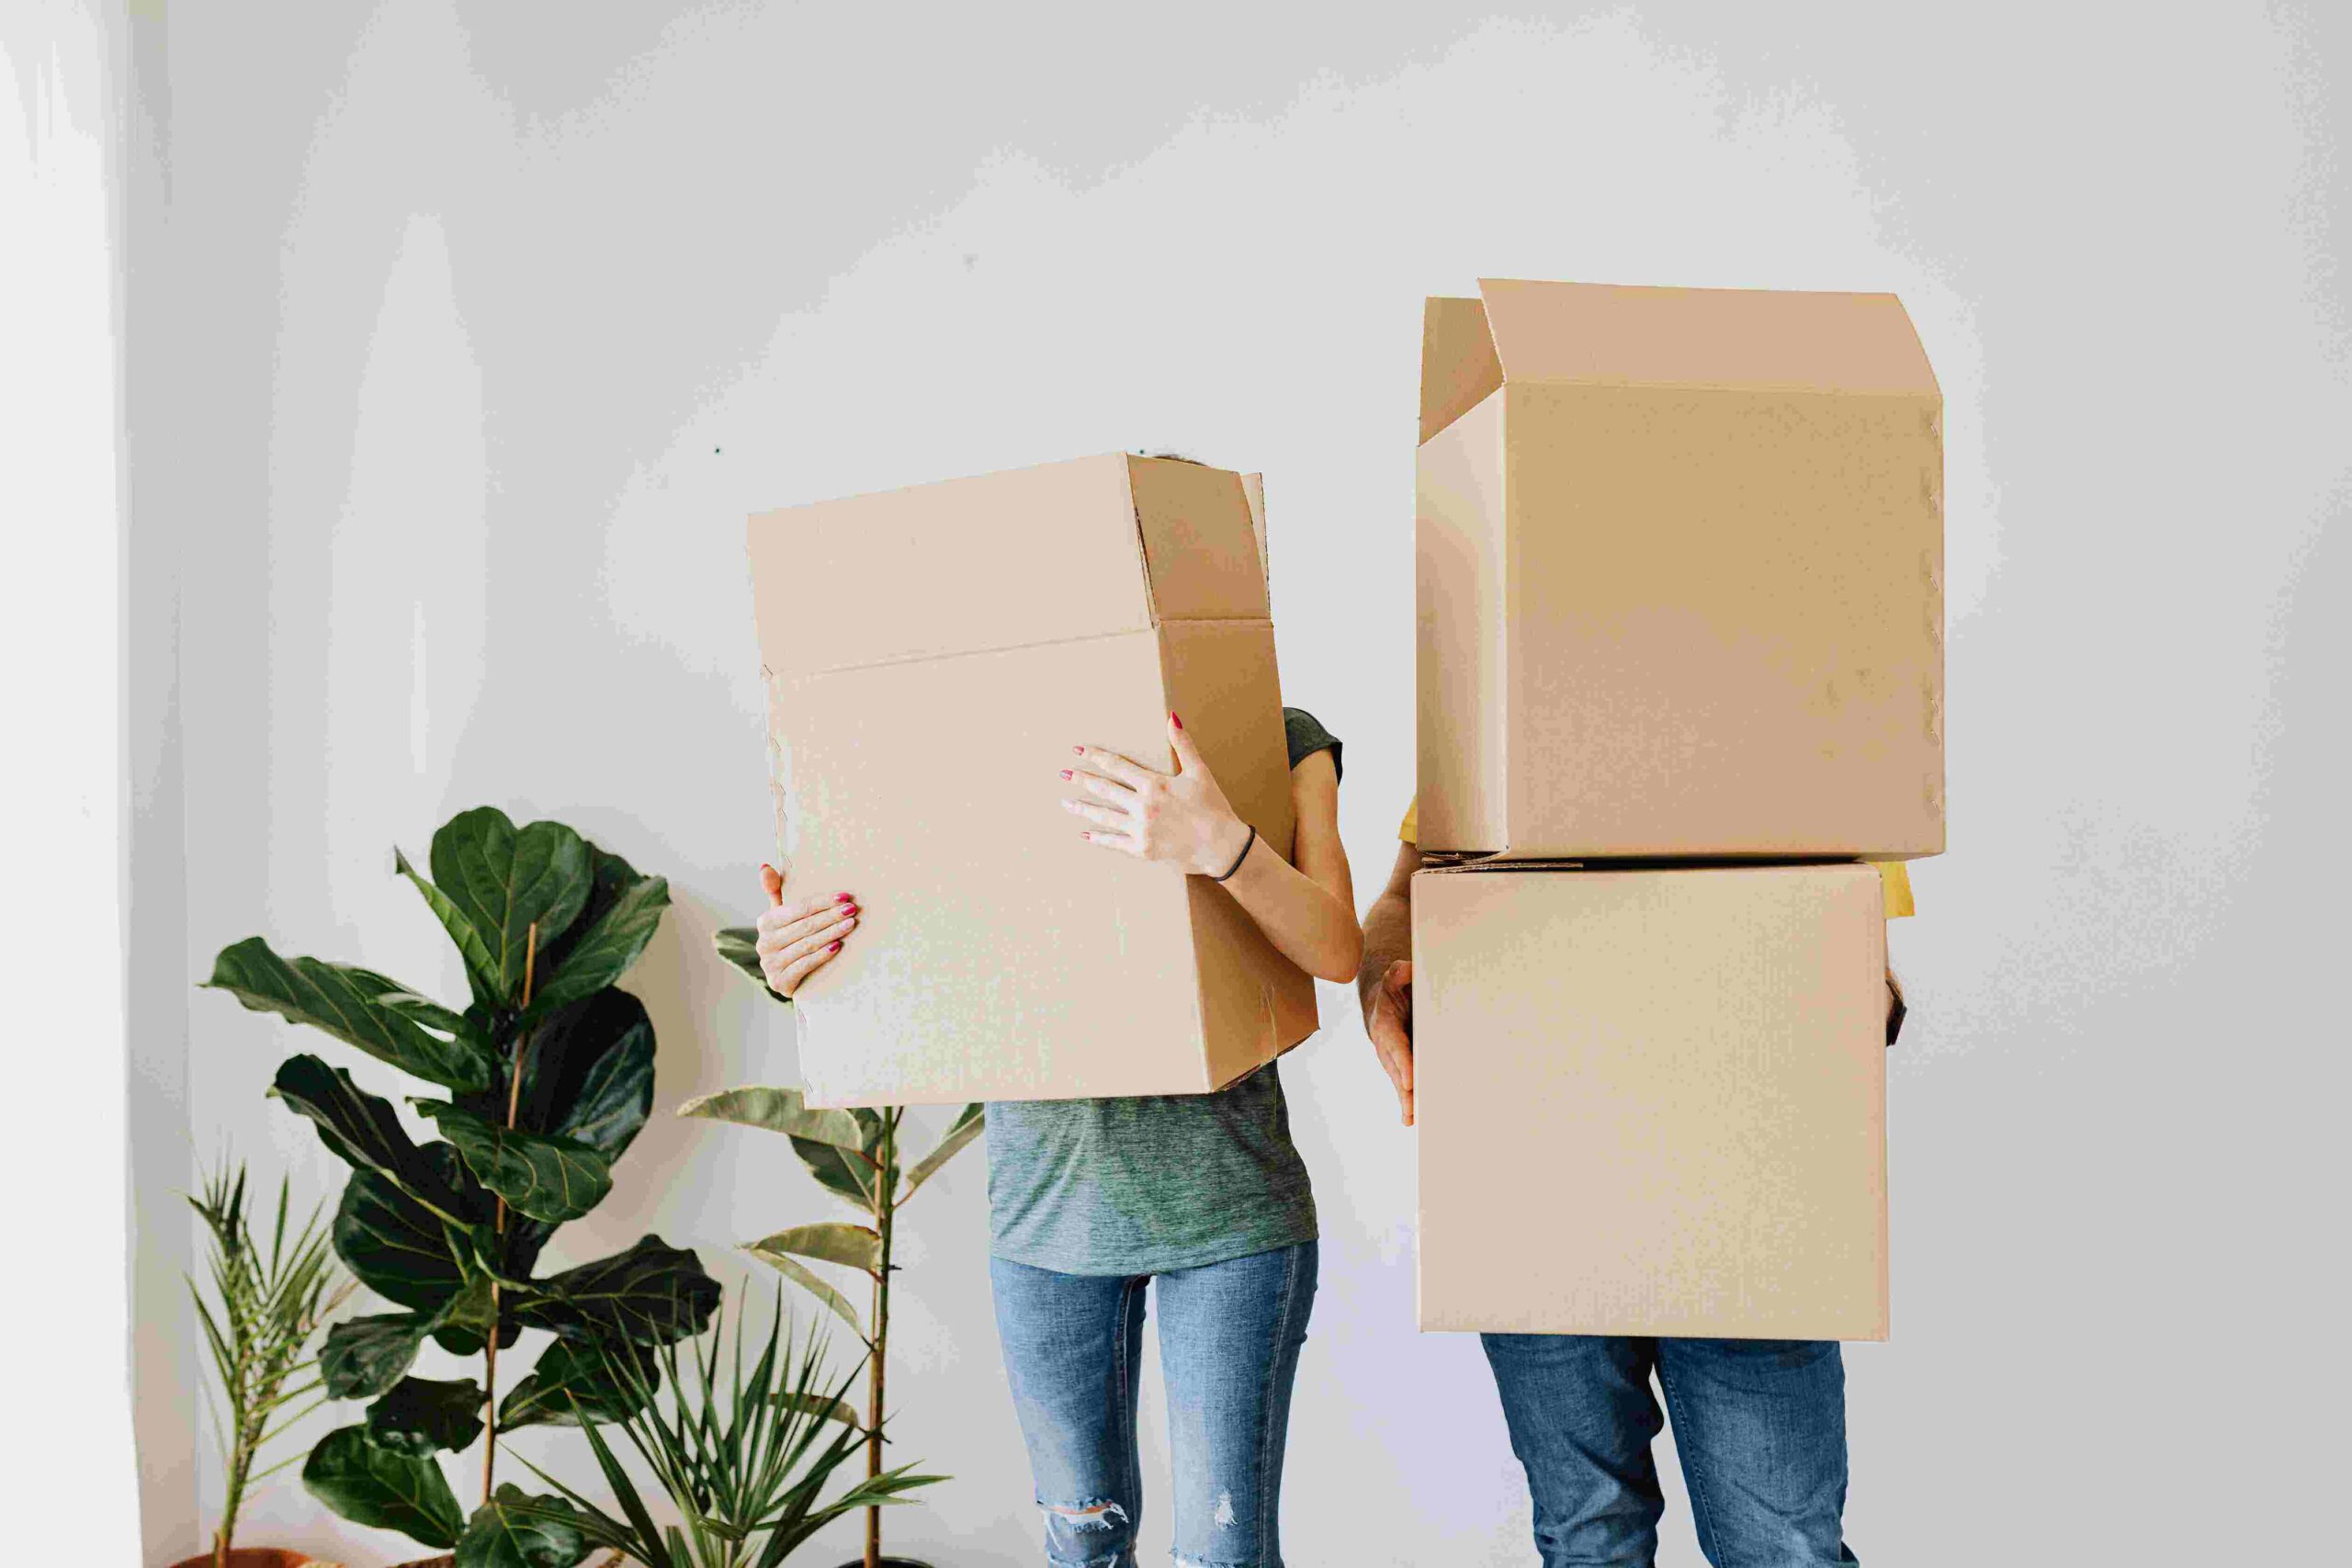 Using a professional Organizer to pack and unpack your belongings for a move menas the unpacking will be more organized.